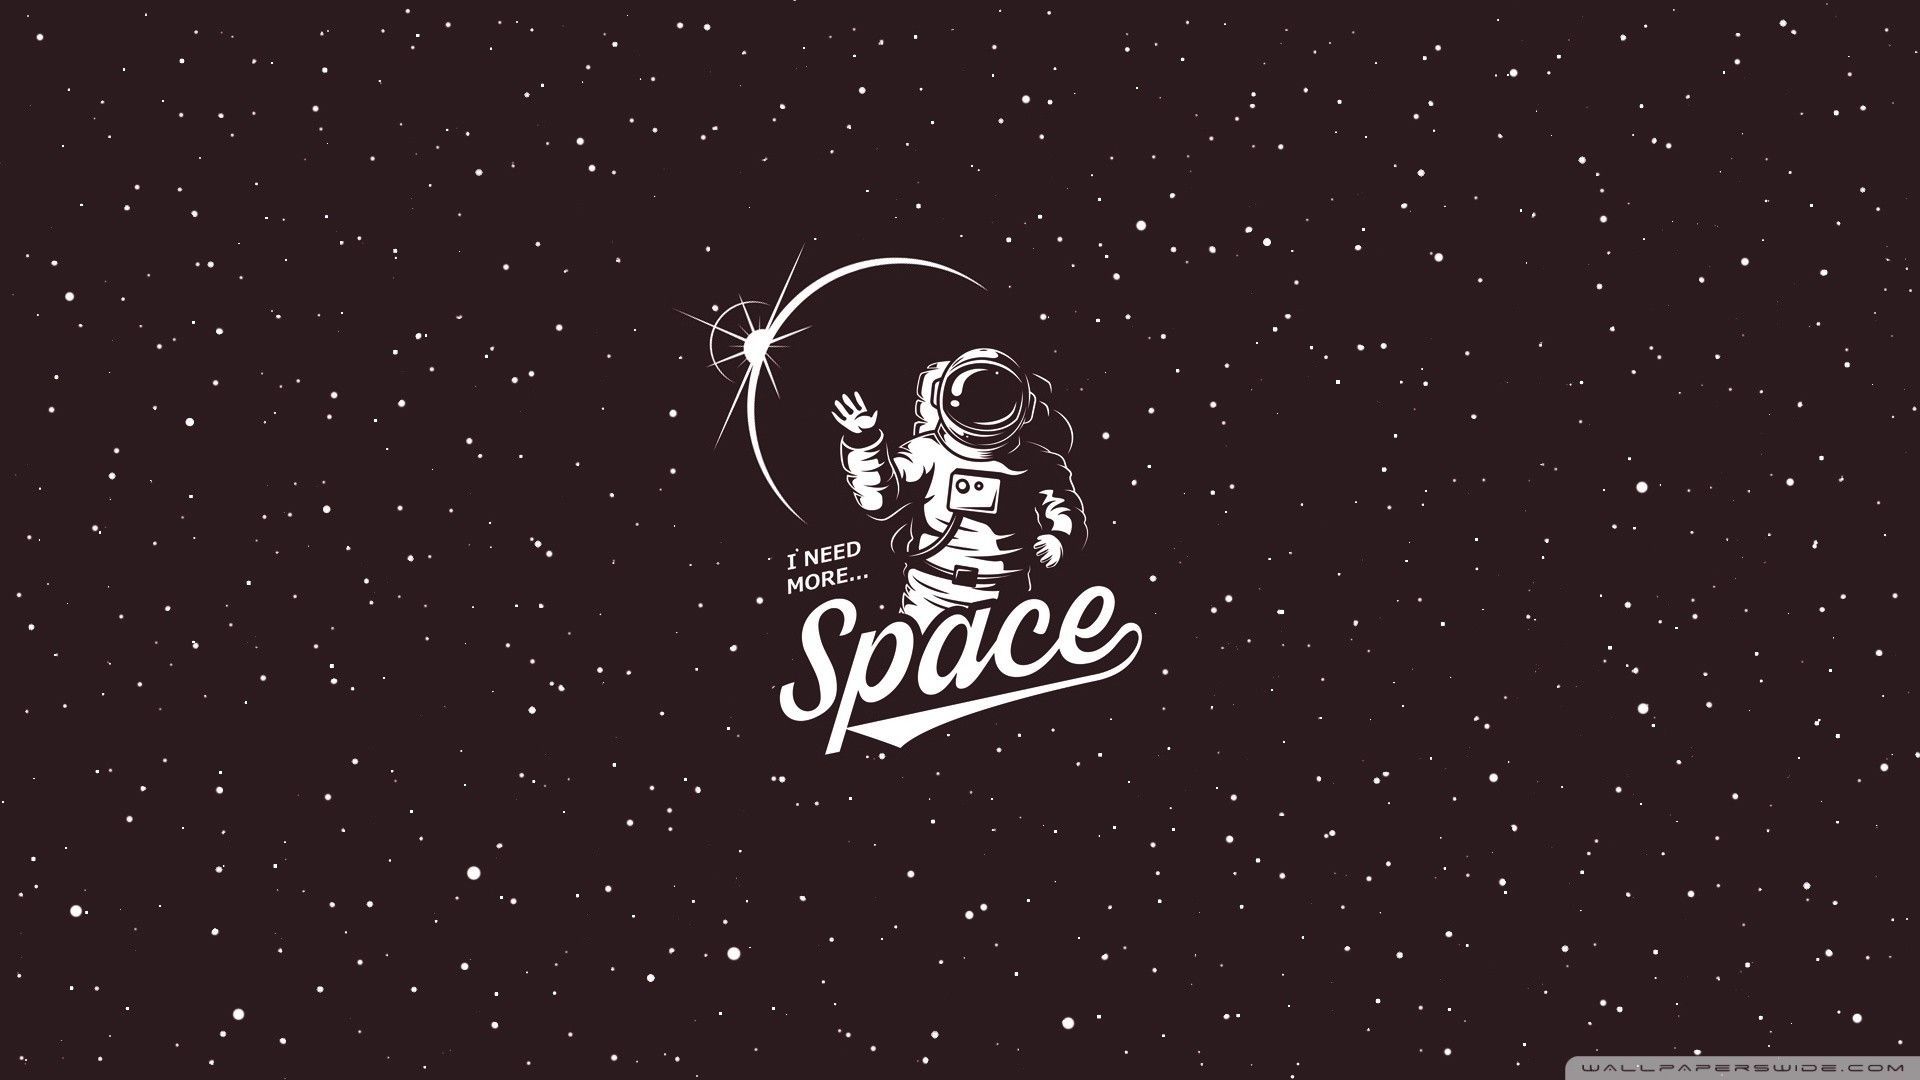 Aesthetic Space for Laptop Wallpaper